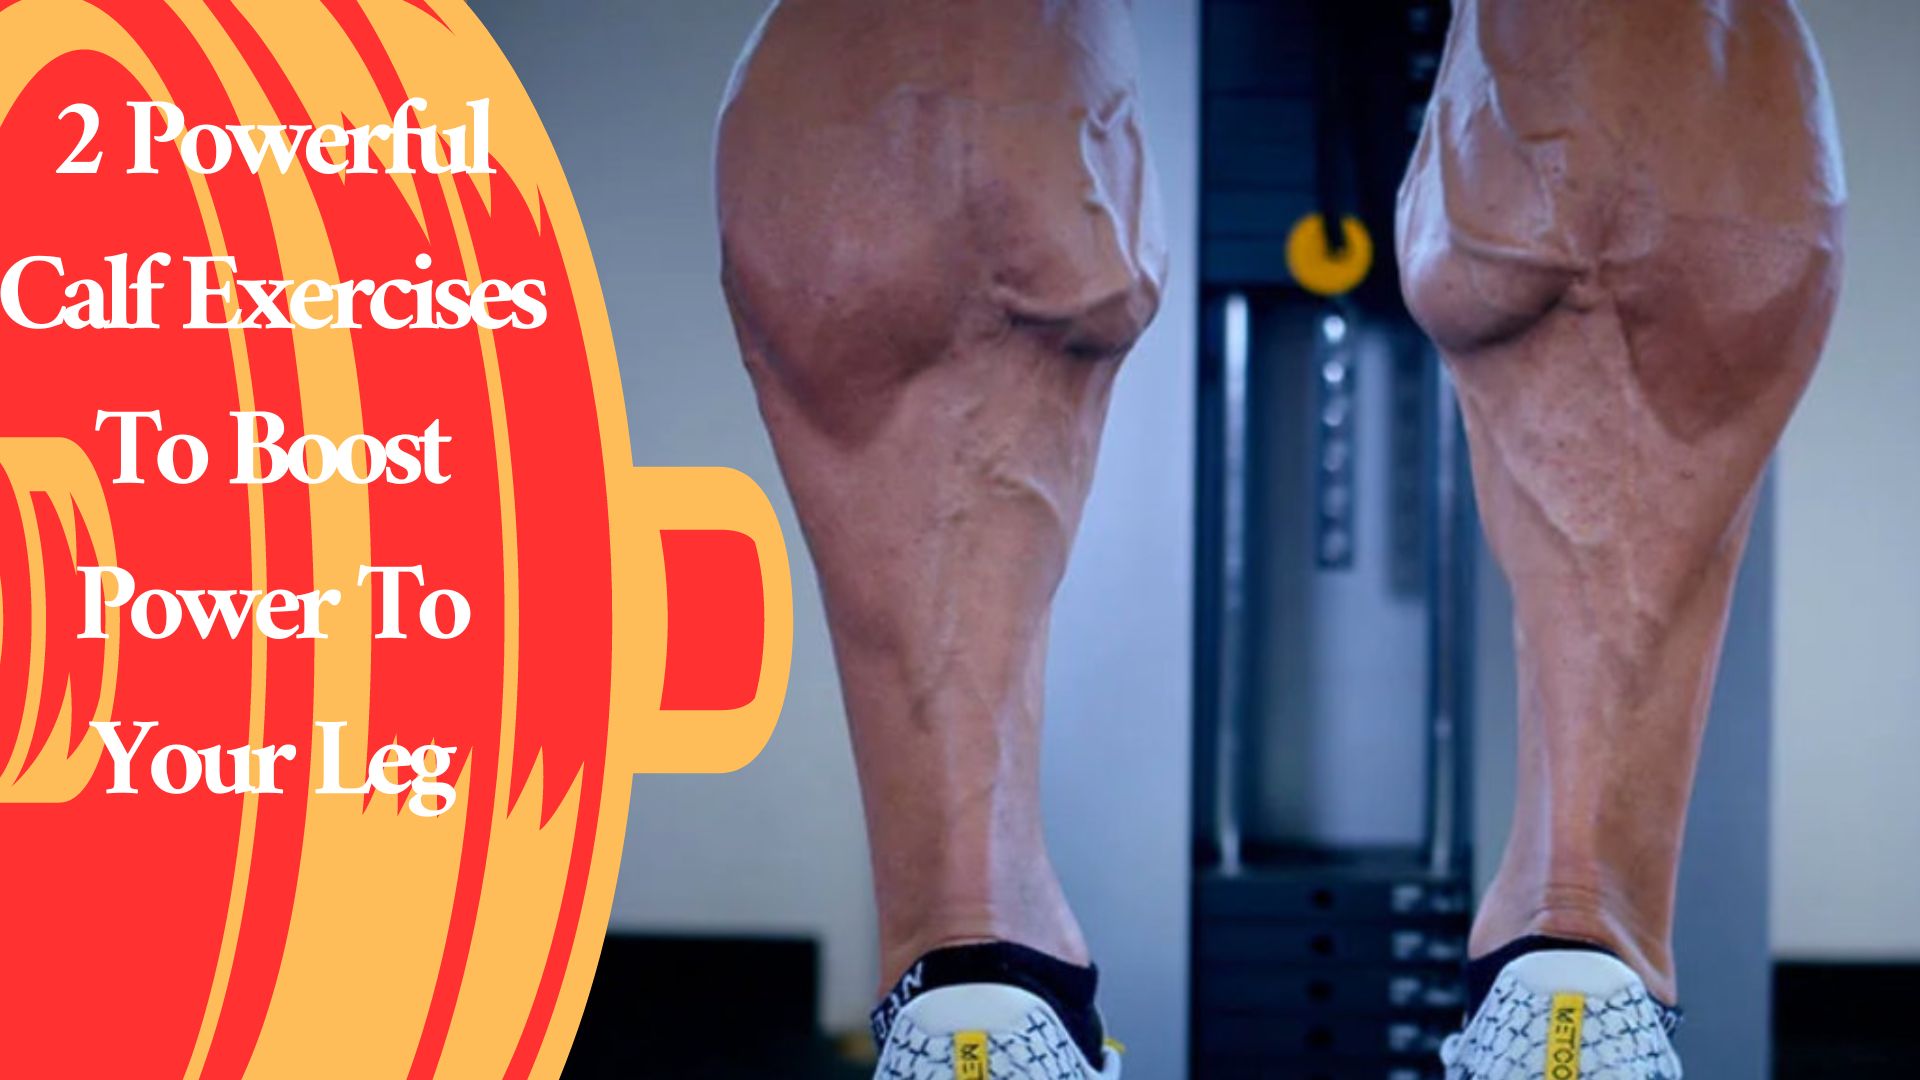 2 Powerful Calf Exercises To Boost Power To Your Leg